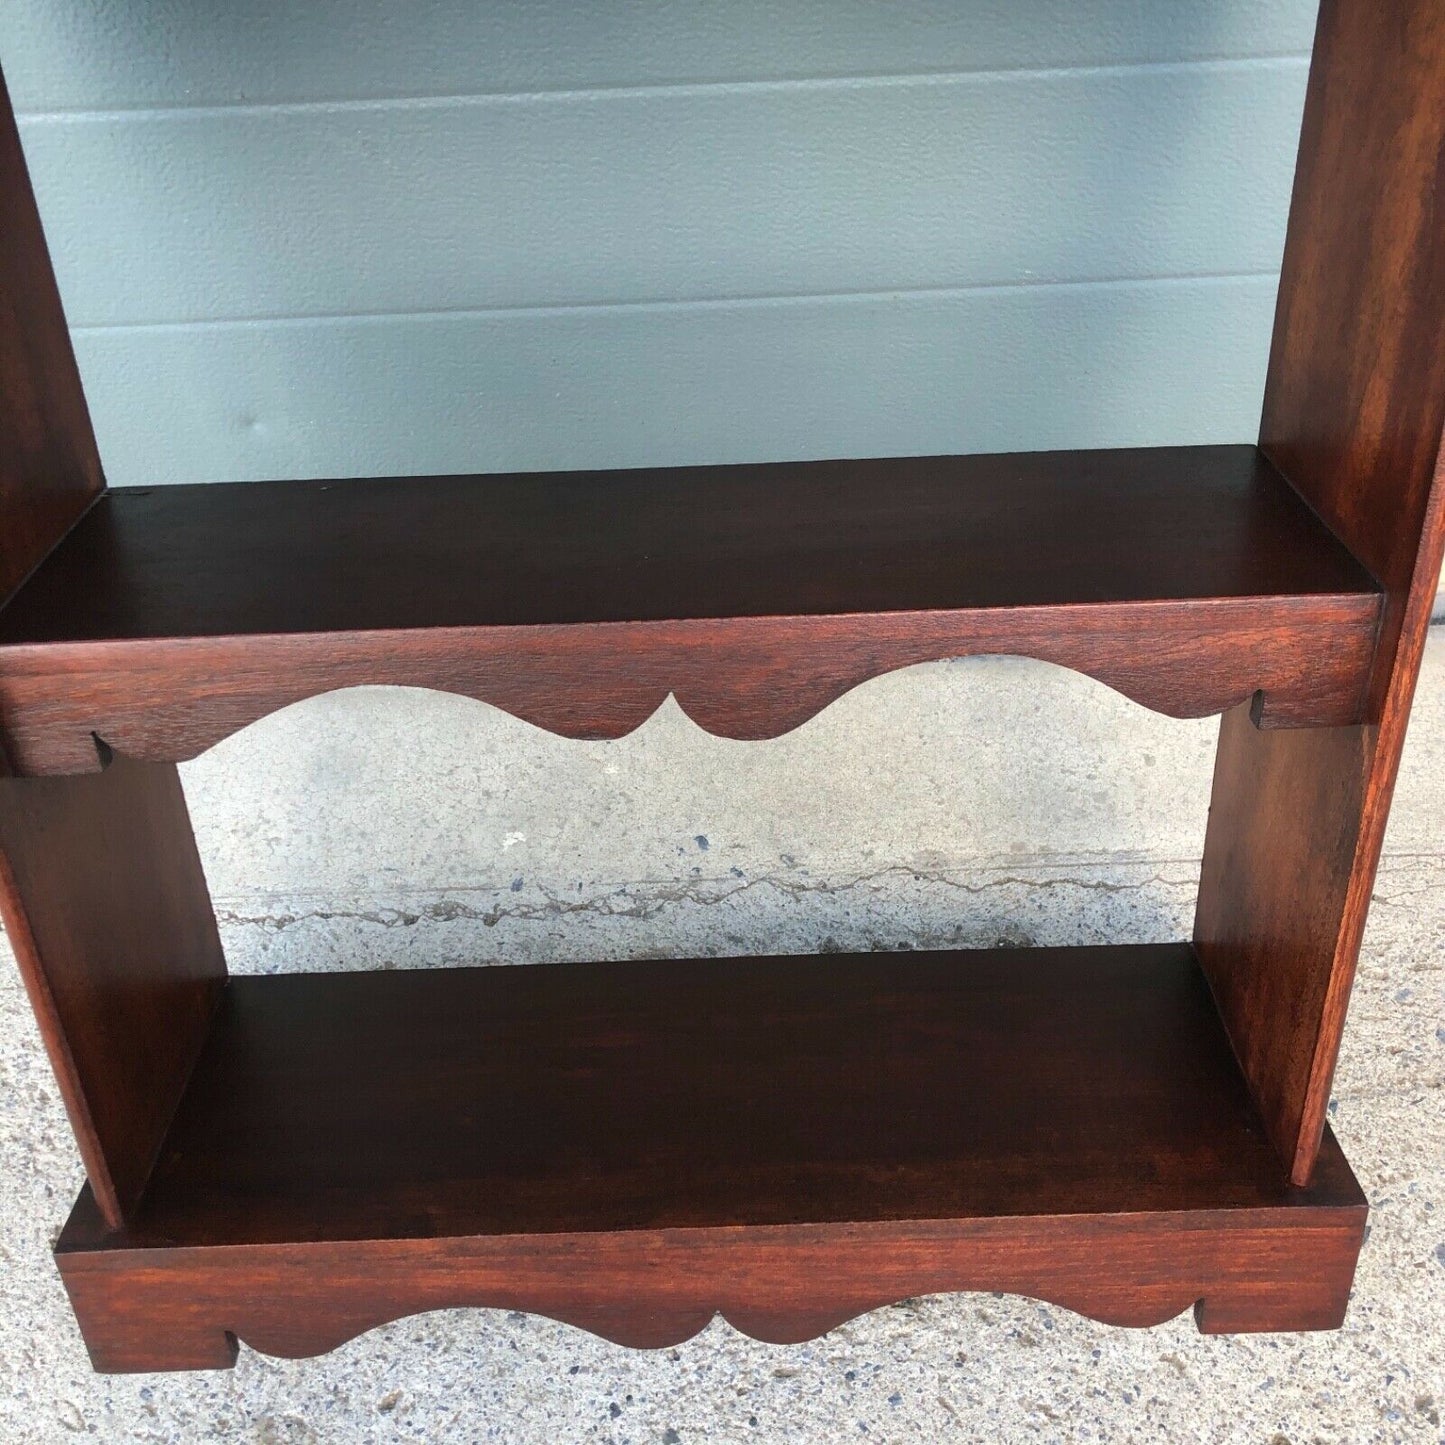 Mahogany Shelves Or Vintage Small Bookcase ( SOLD )